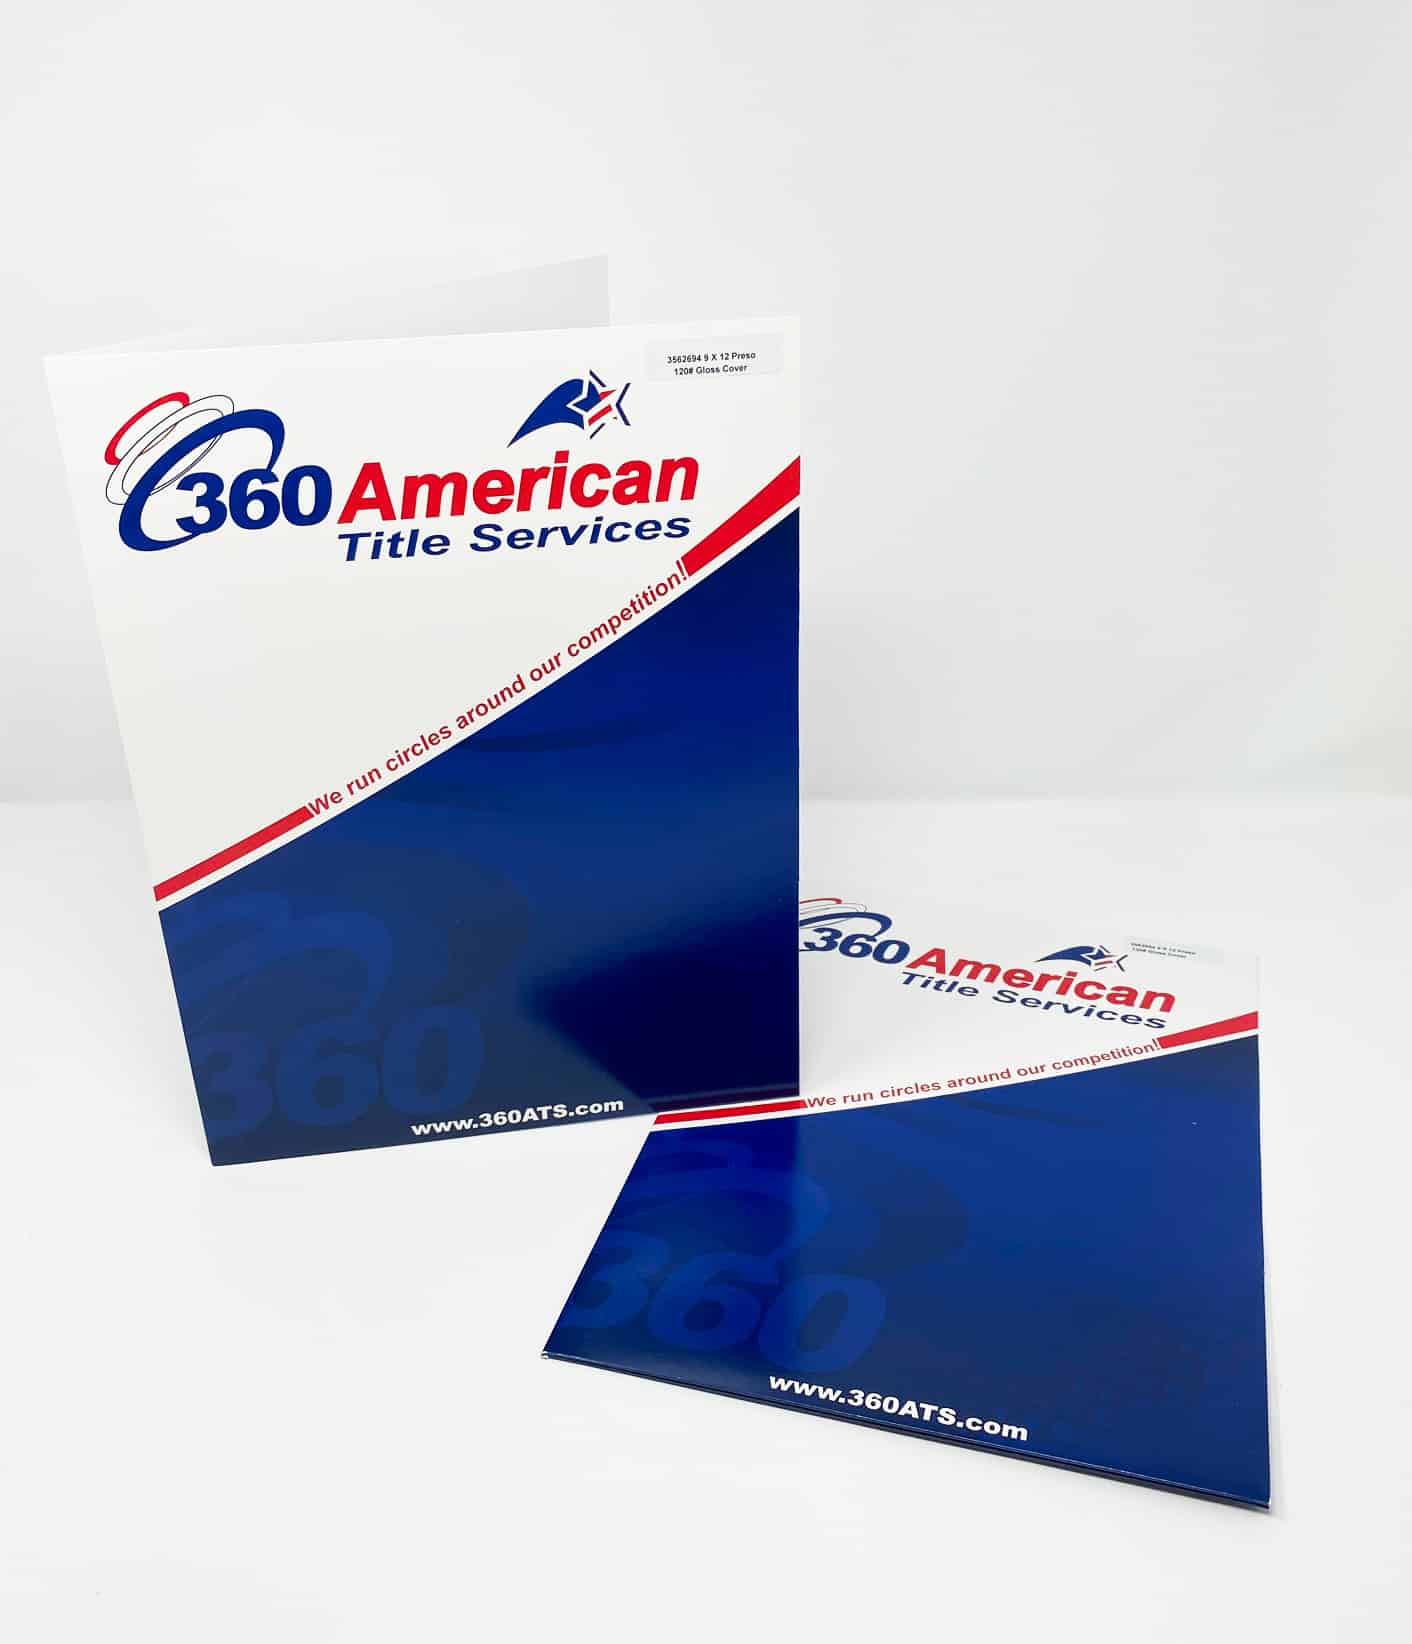 Examples of professional presentation folders made for 360 American Title Services.